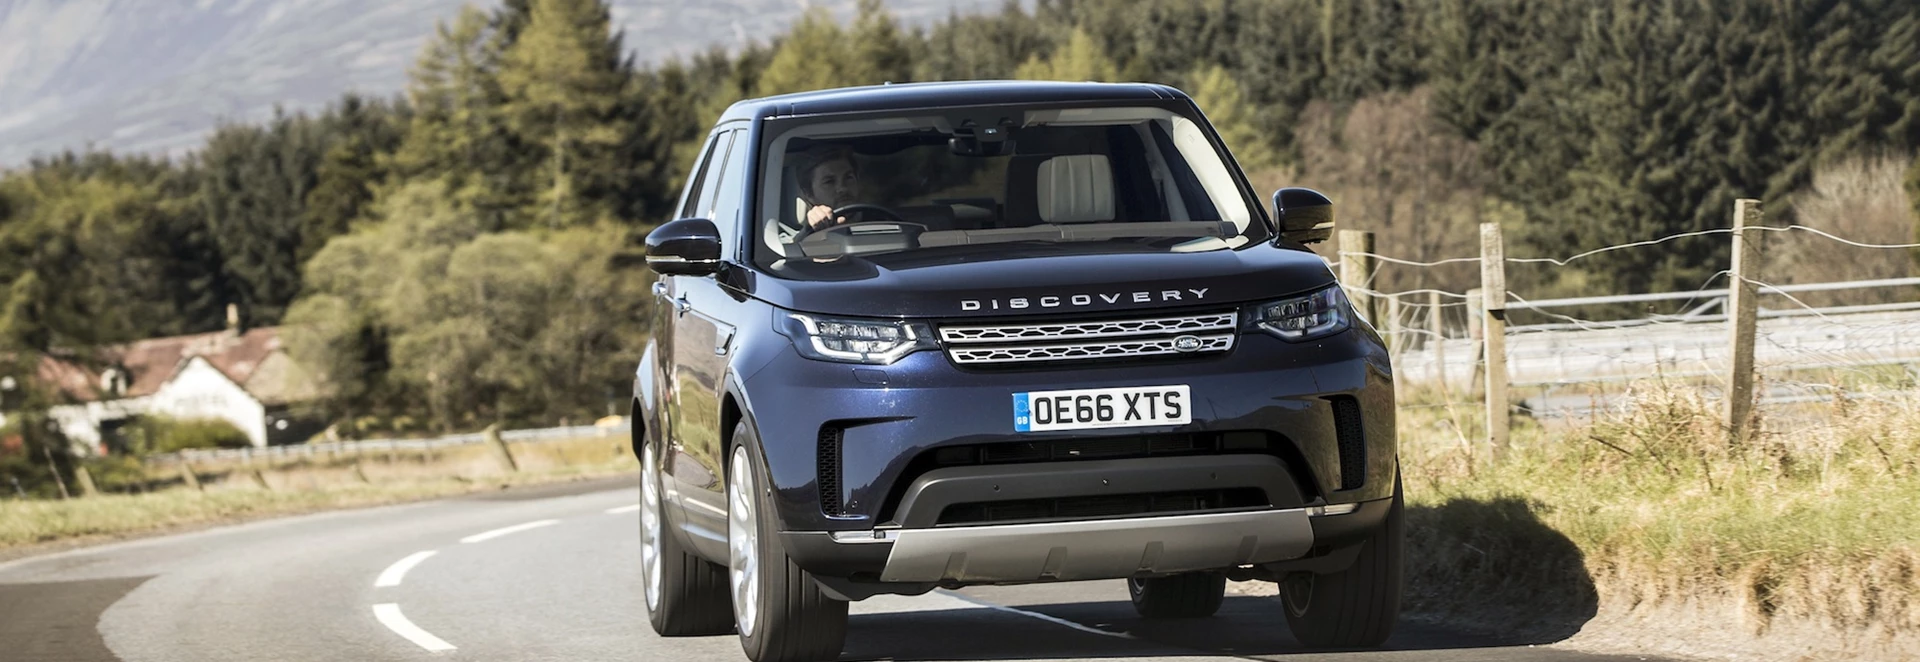 2018 Land Rover Discovery review